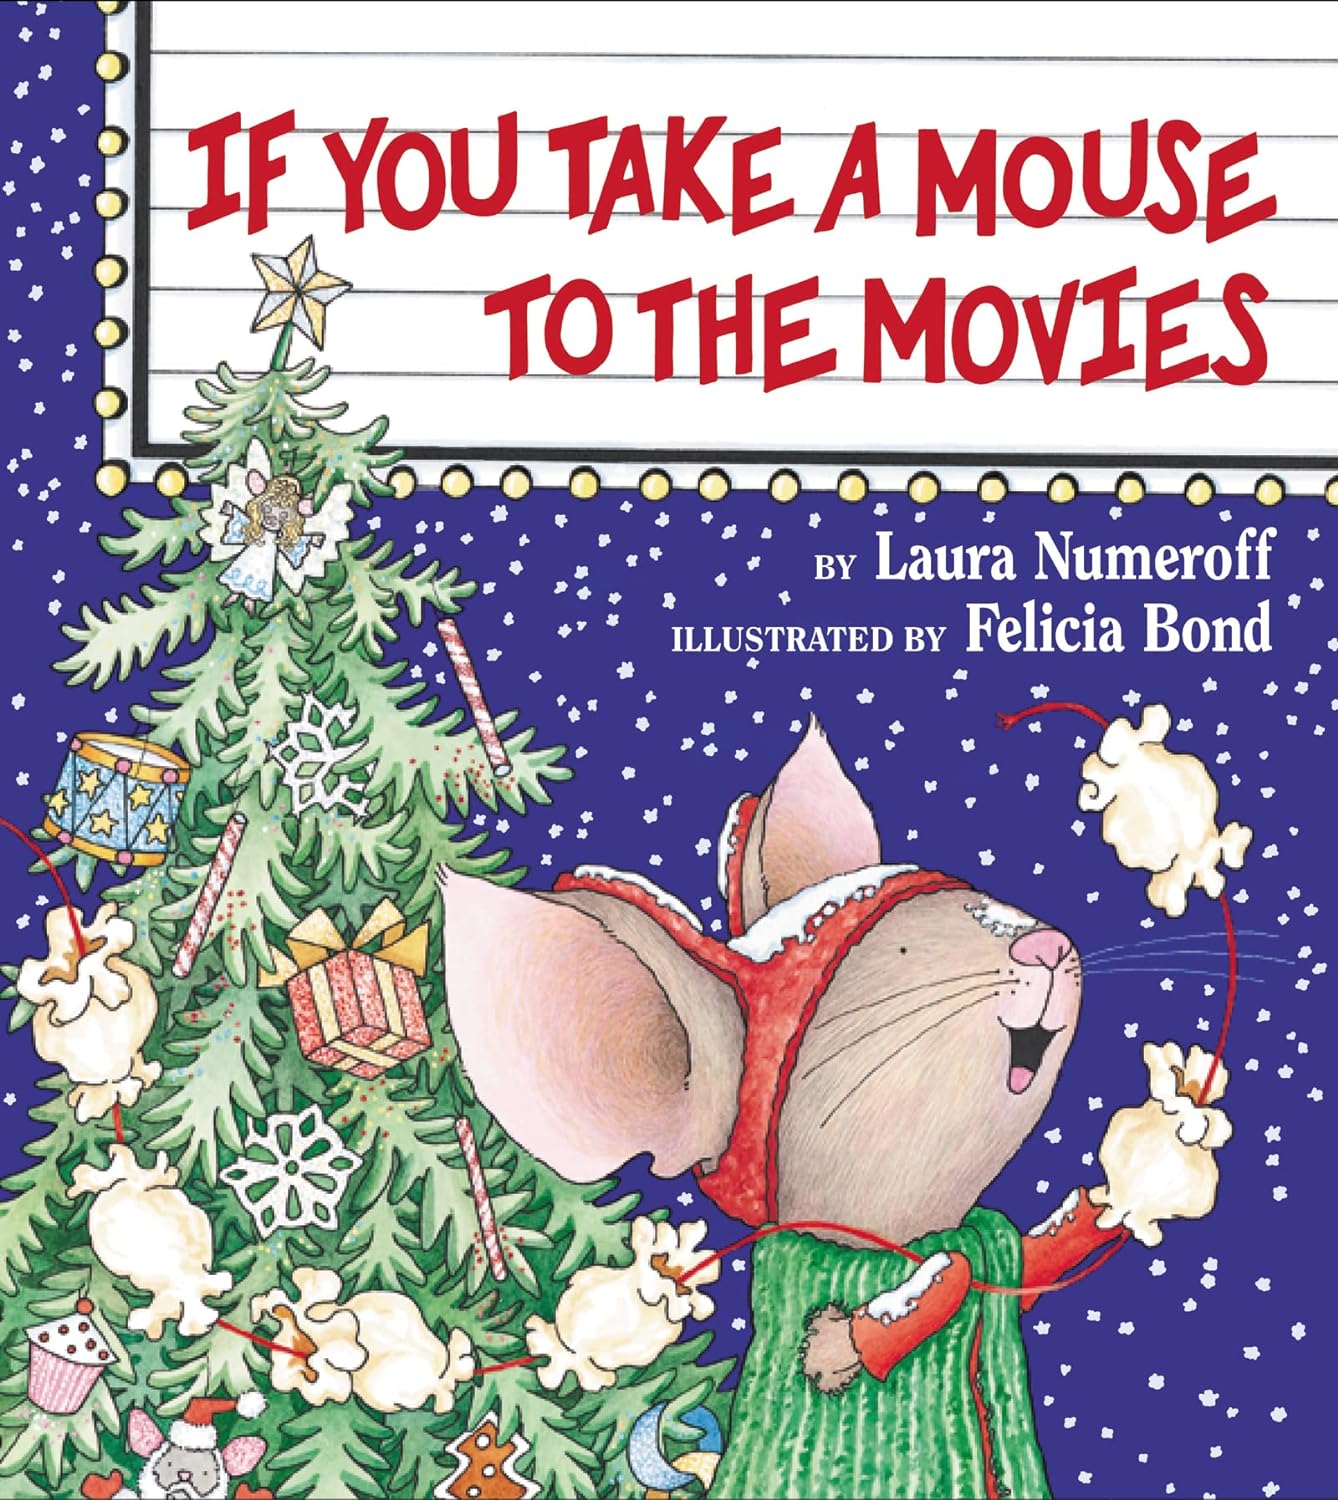 IF YOU TAKE A MOUSE TO THE MOVIES BOOK